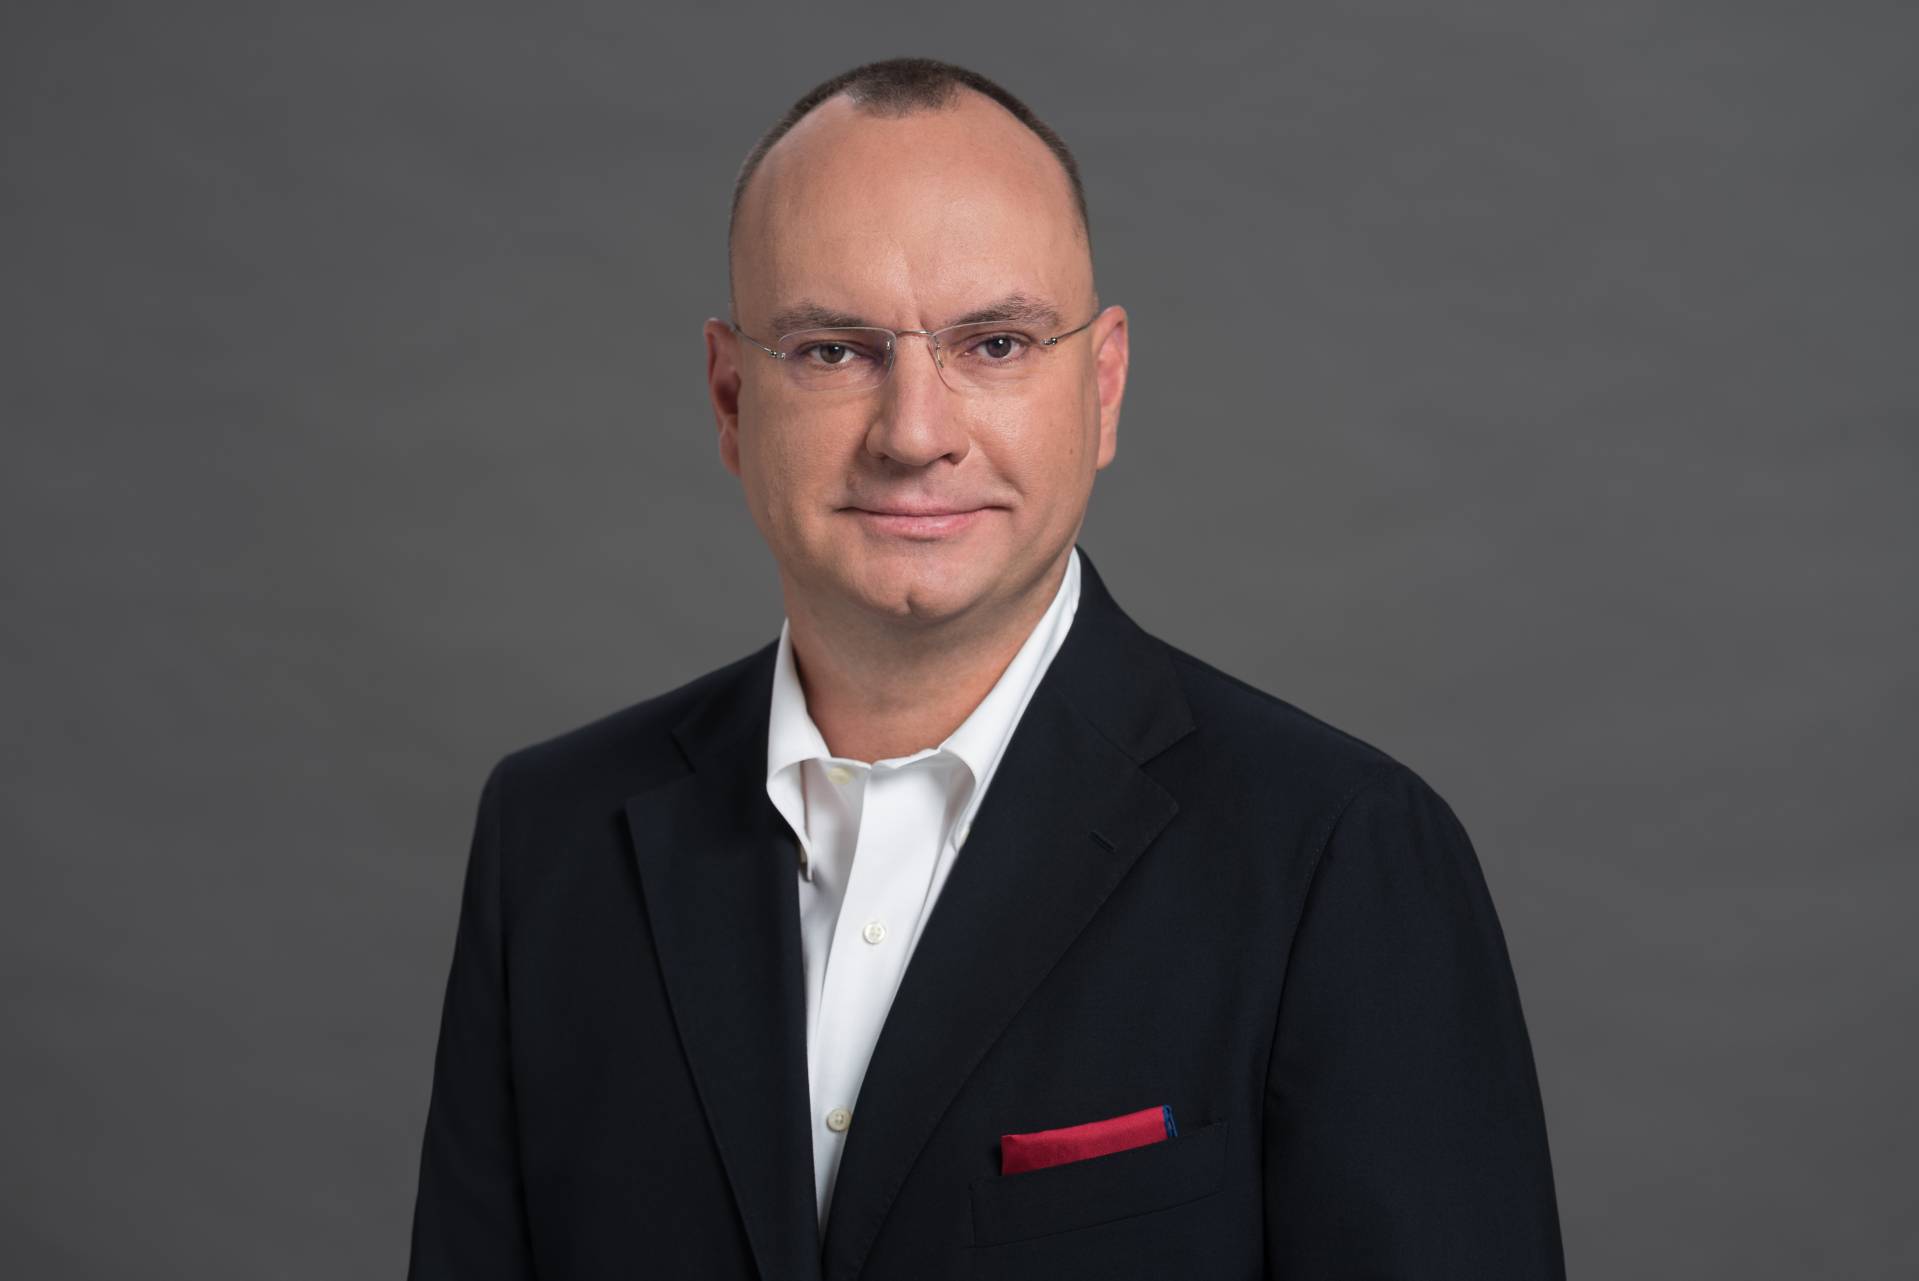 New marketing and e-commerce director at Carrefour Polska